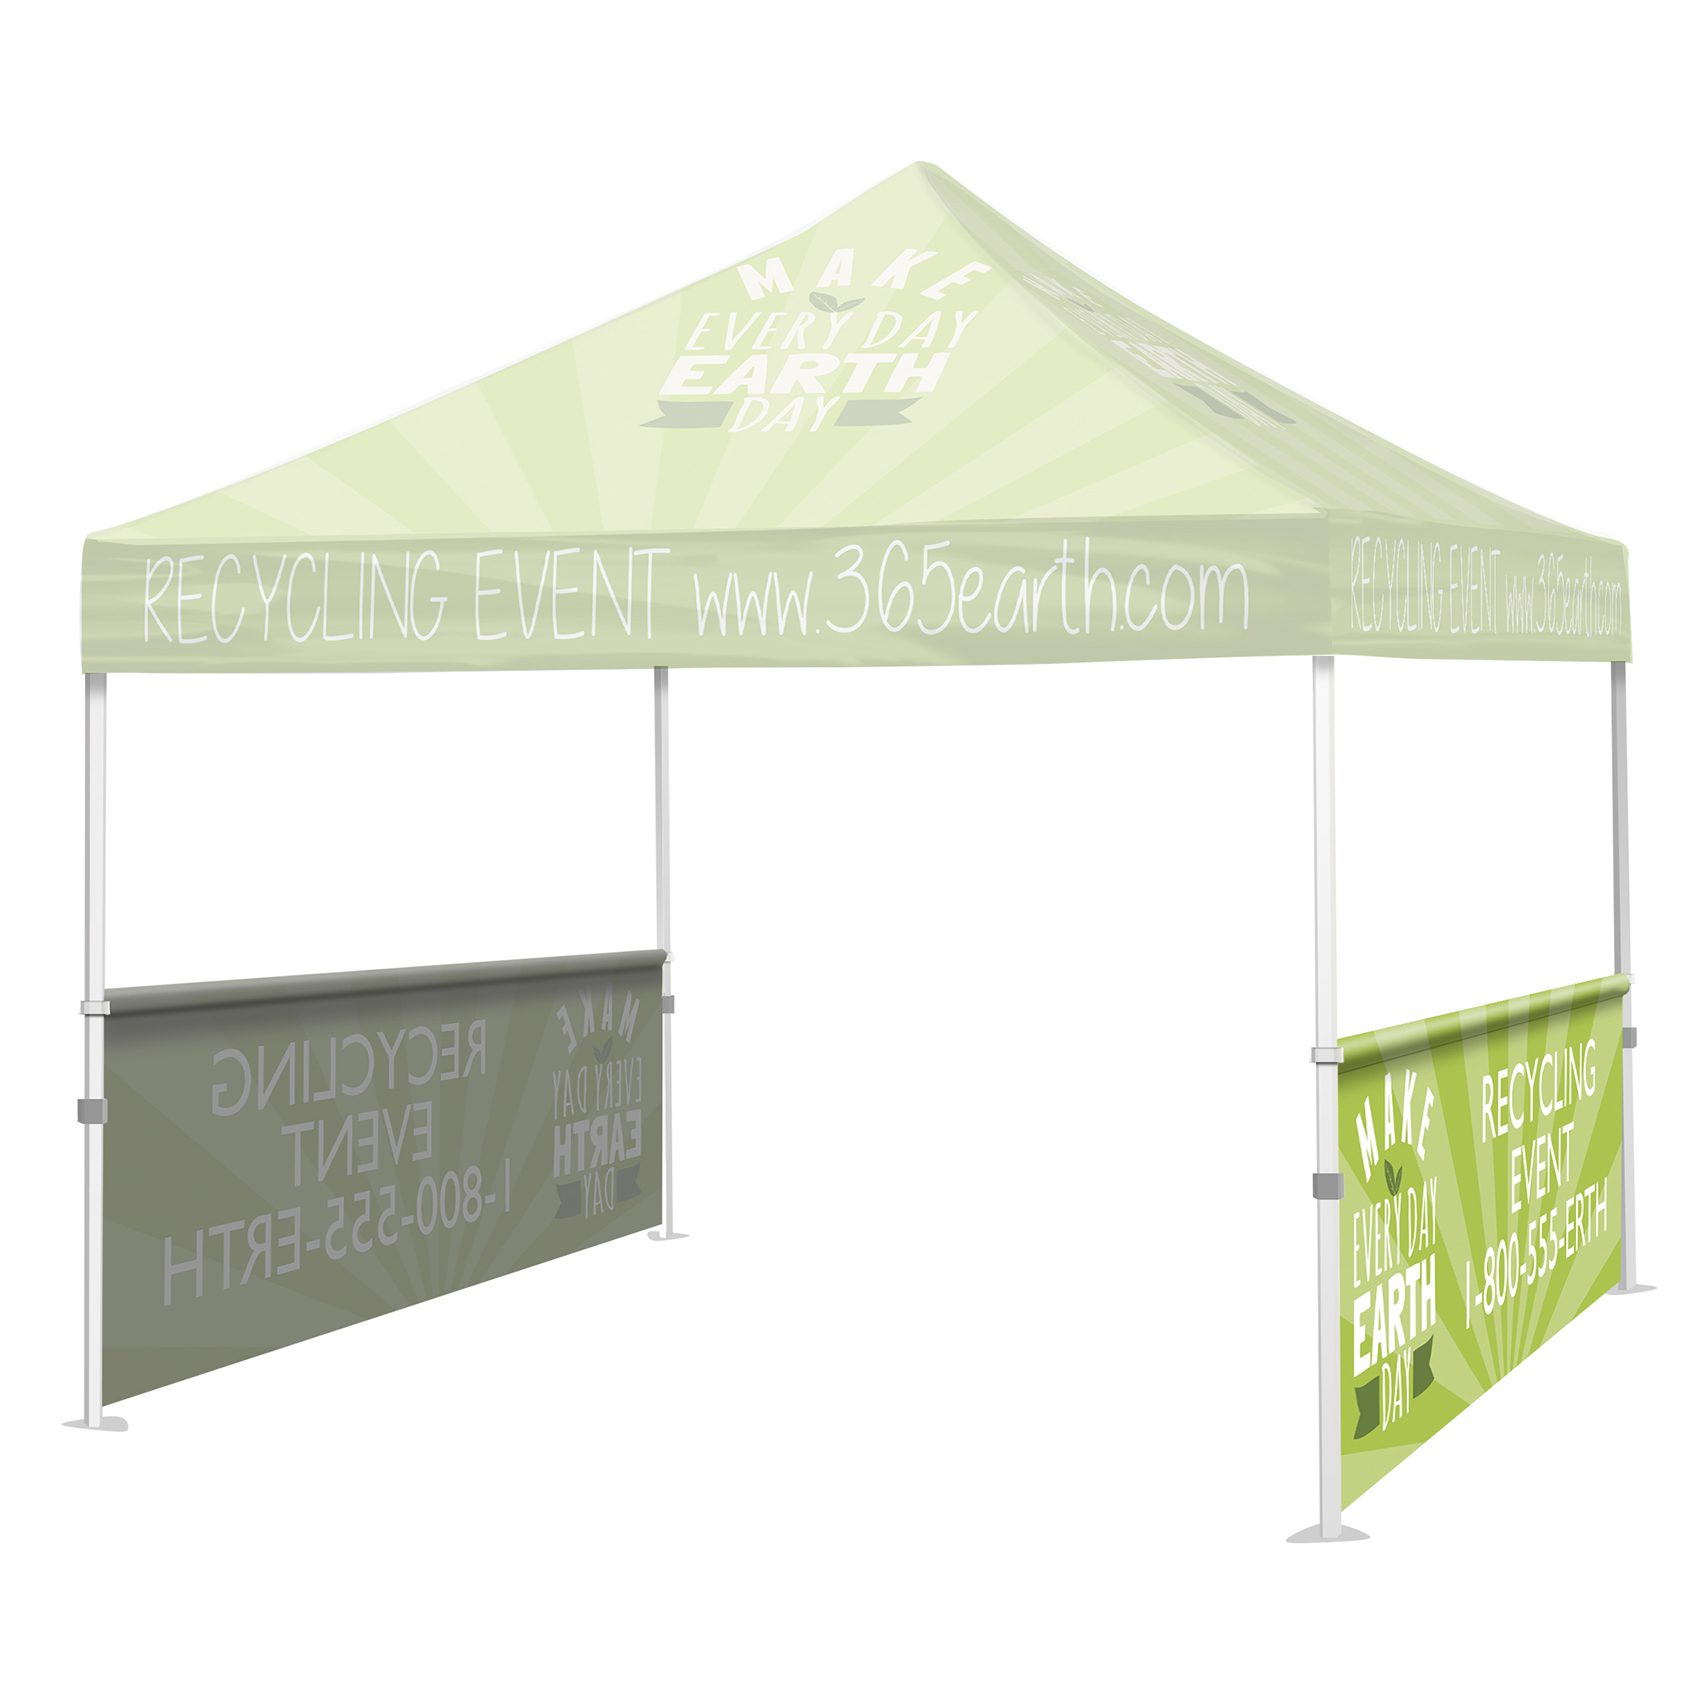 Series B Tent Product Image 09